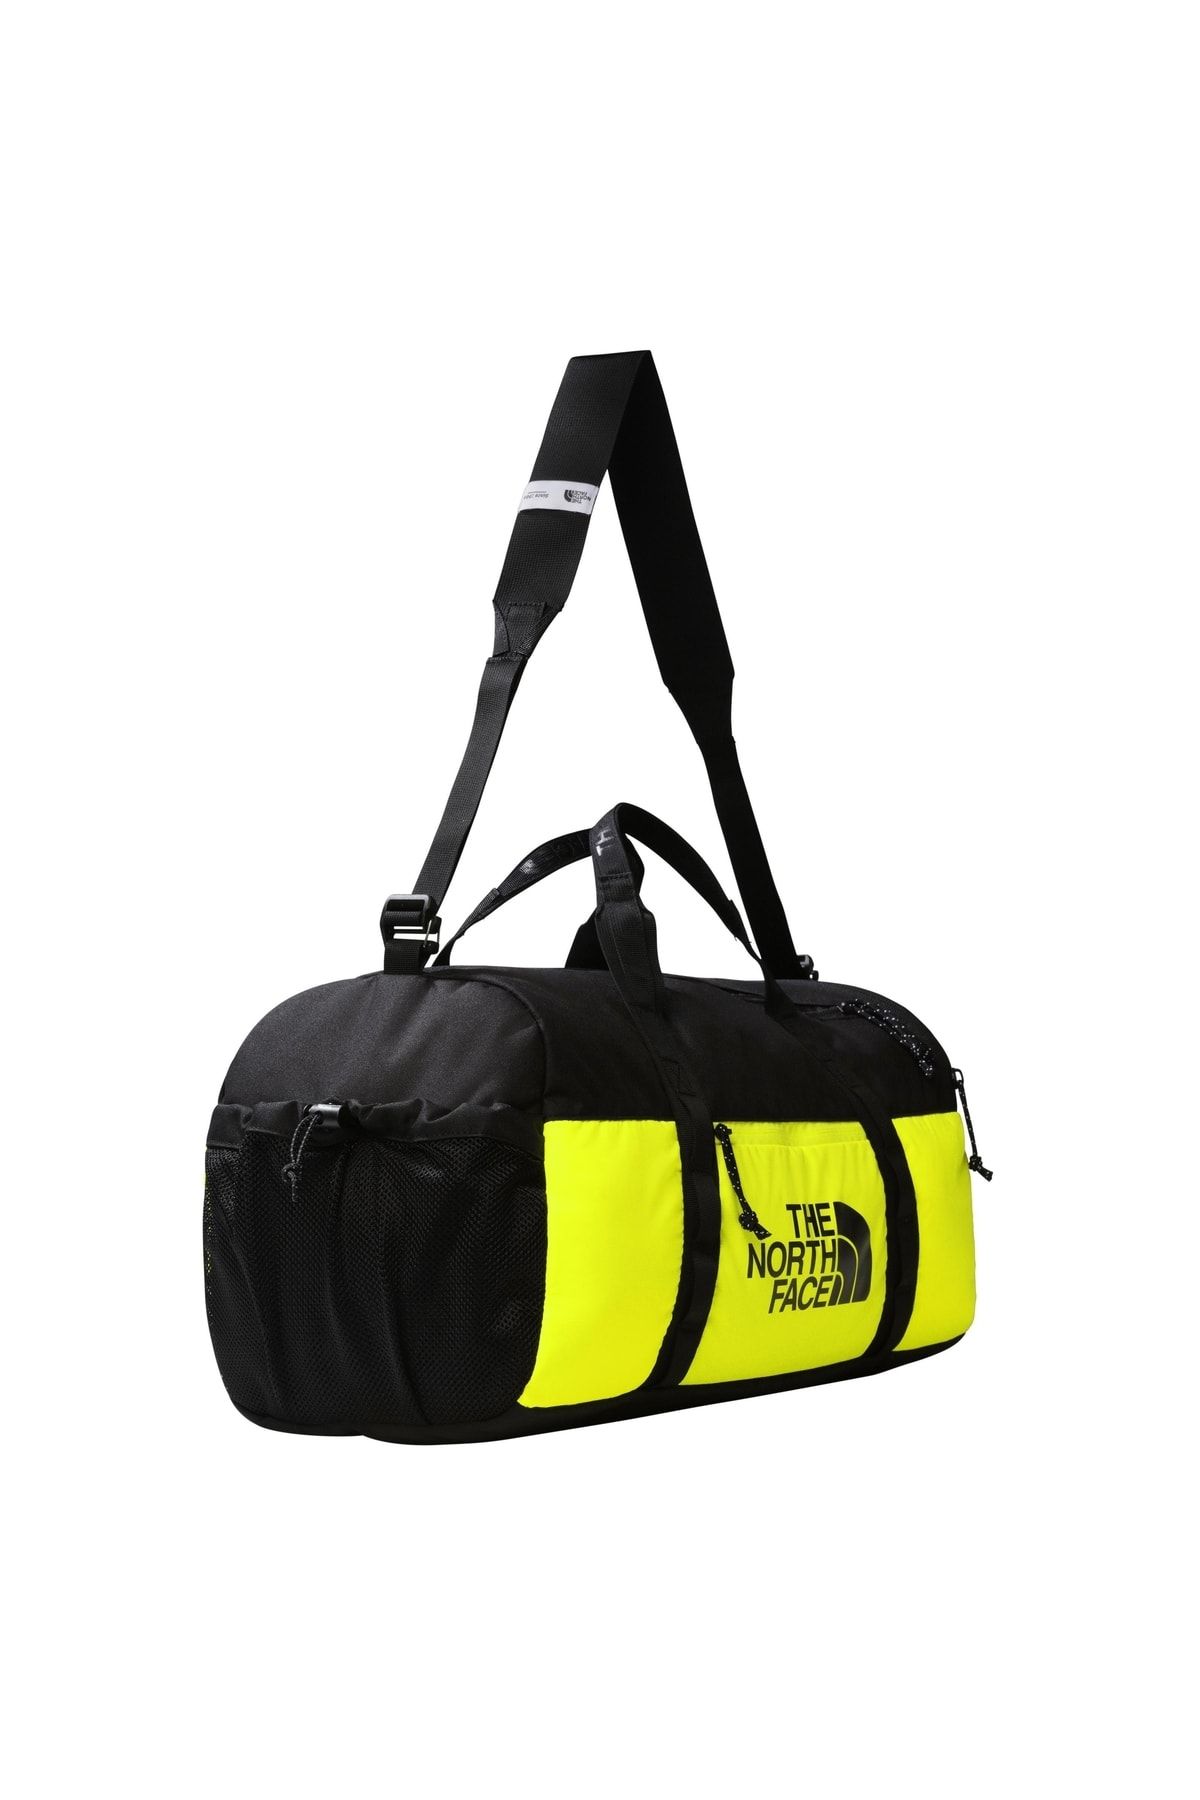 The North Face Bozer Duffel Nf0a52vofm91